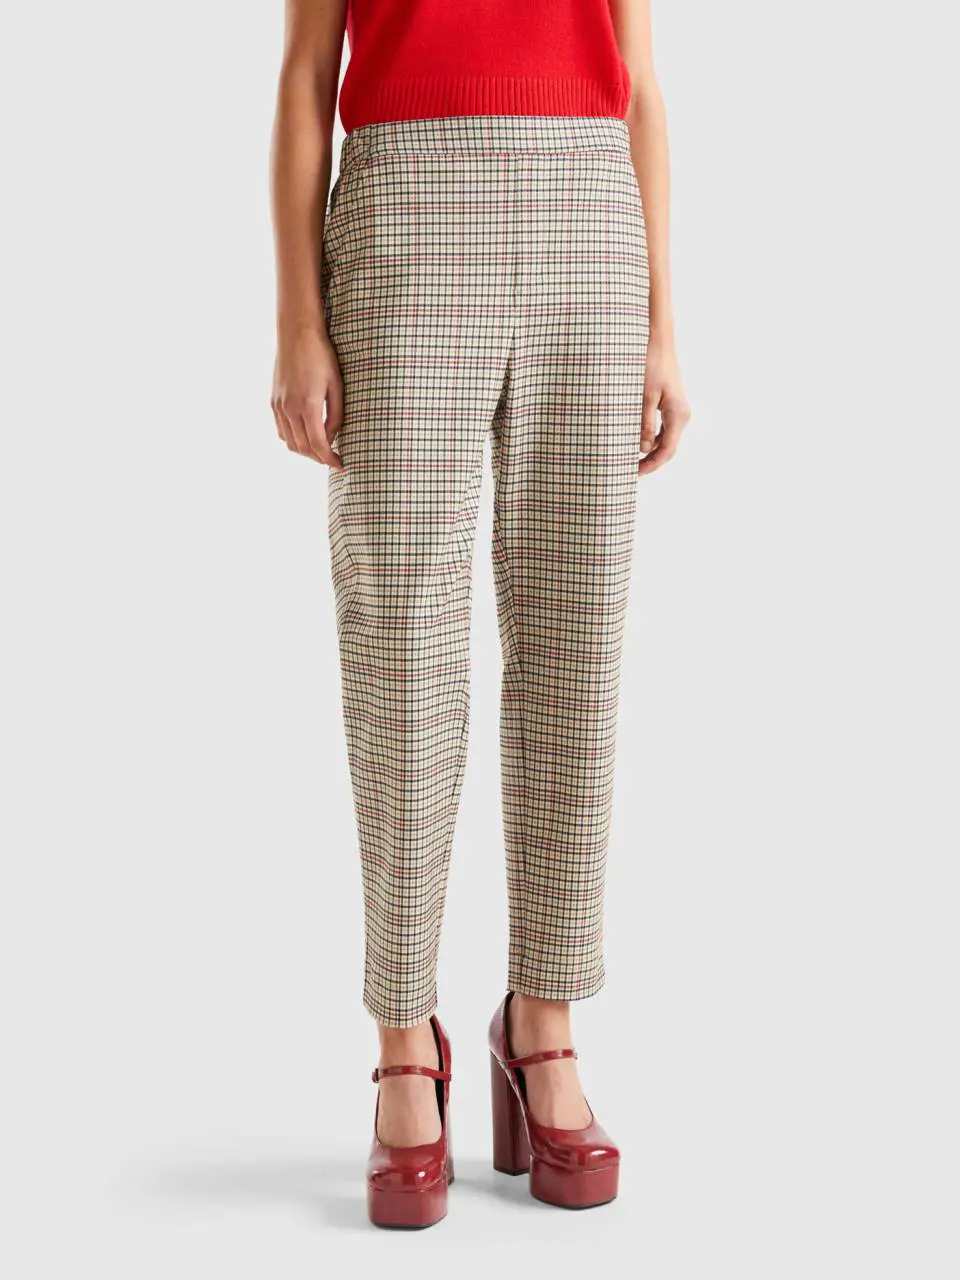 Benetton patterned pants with elastic waist. 1